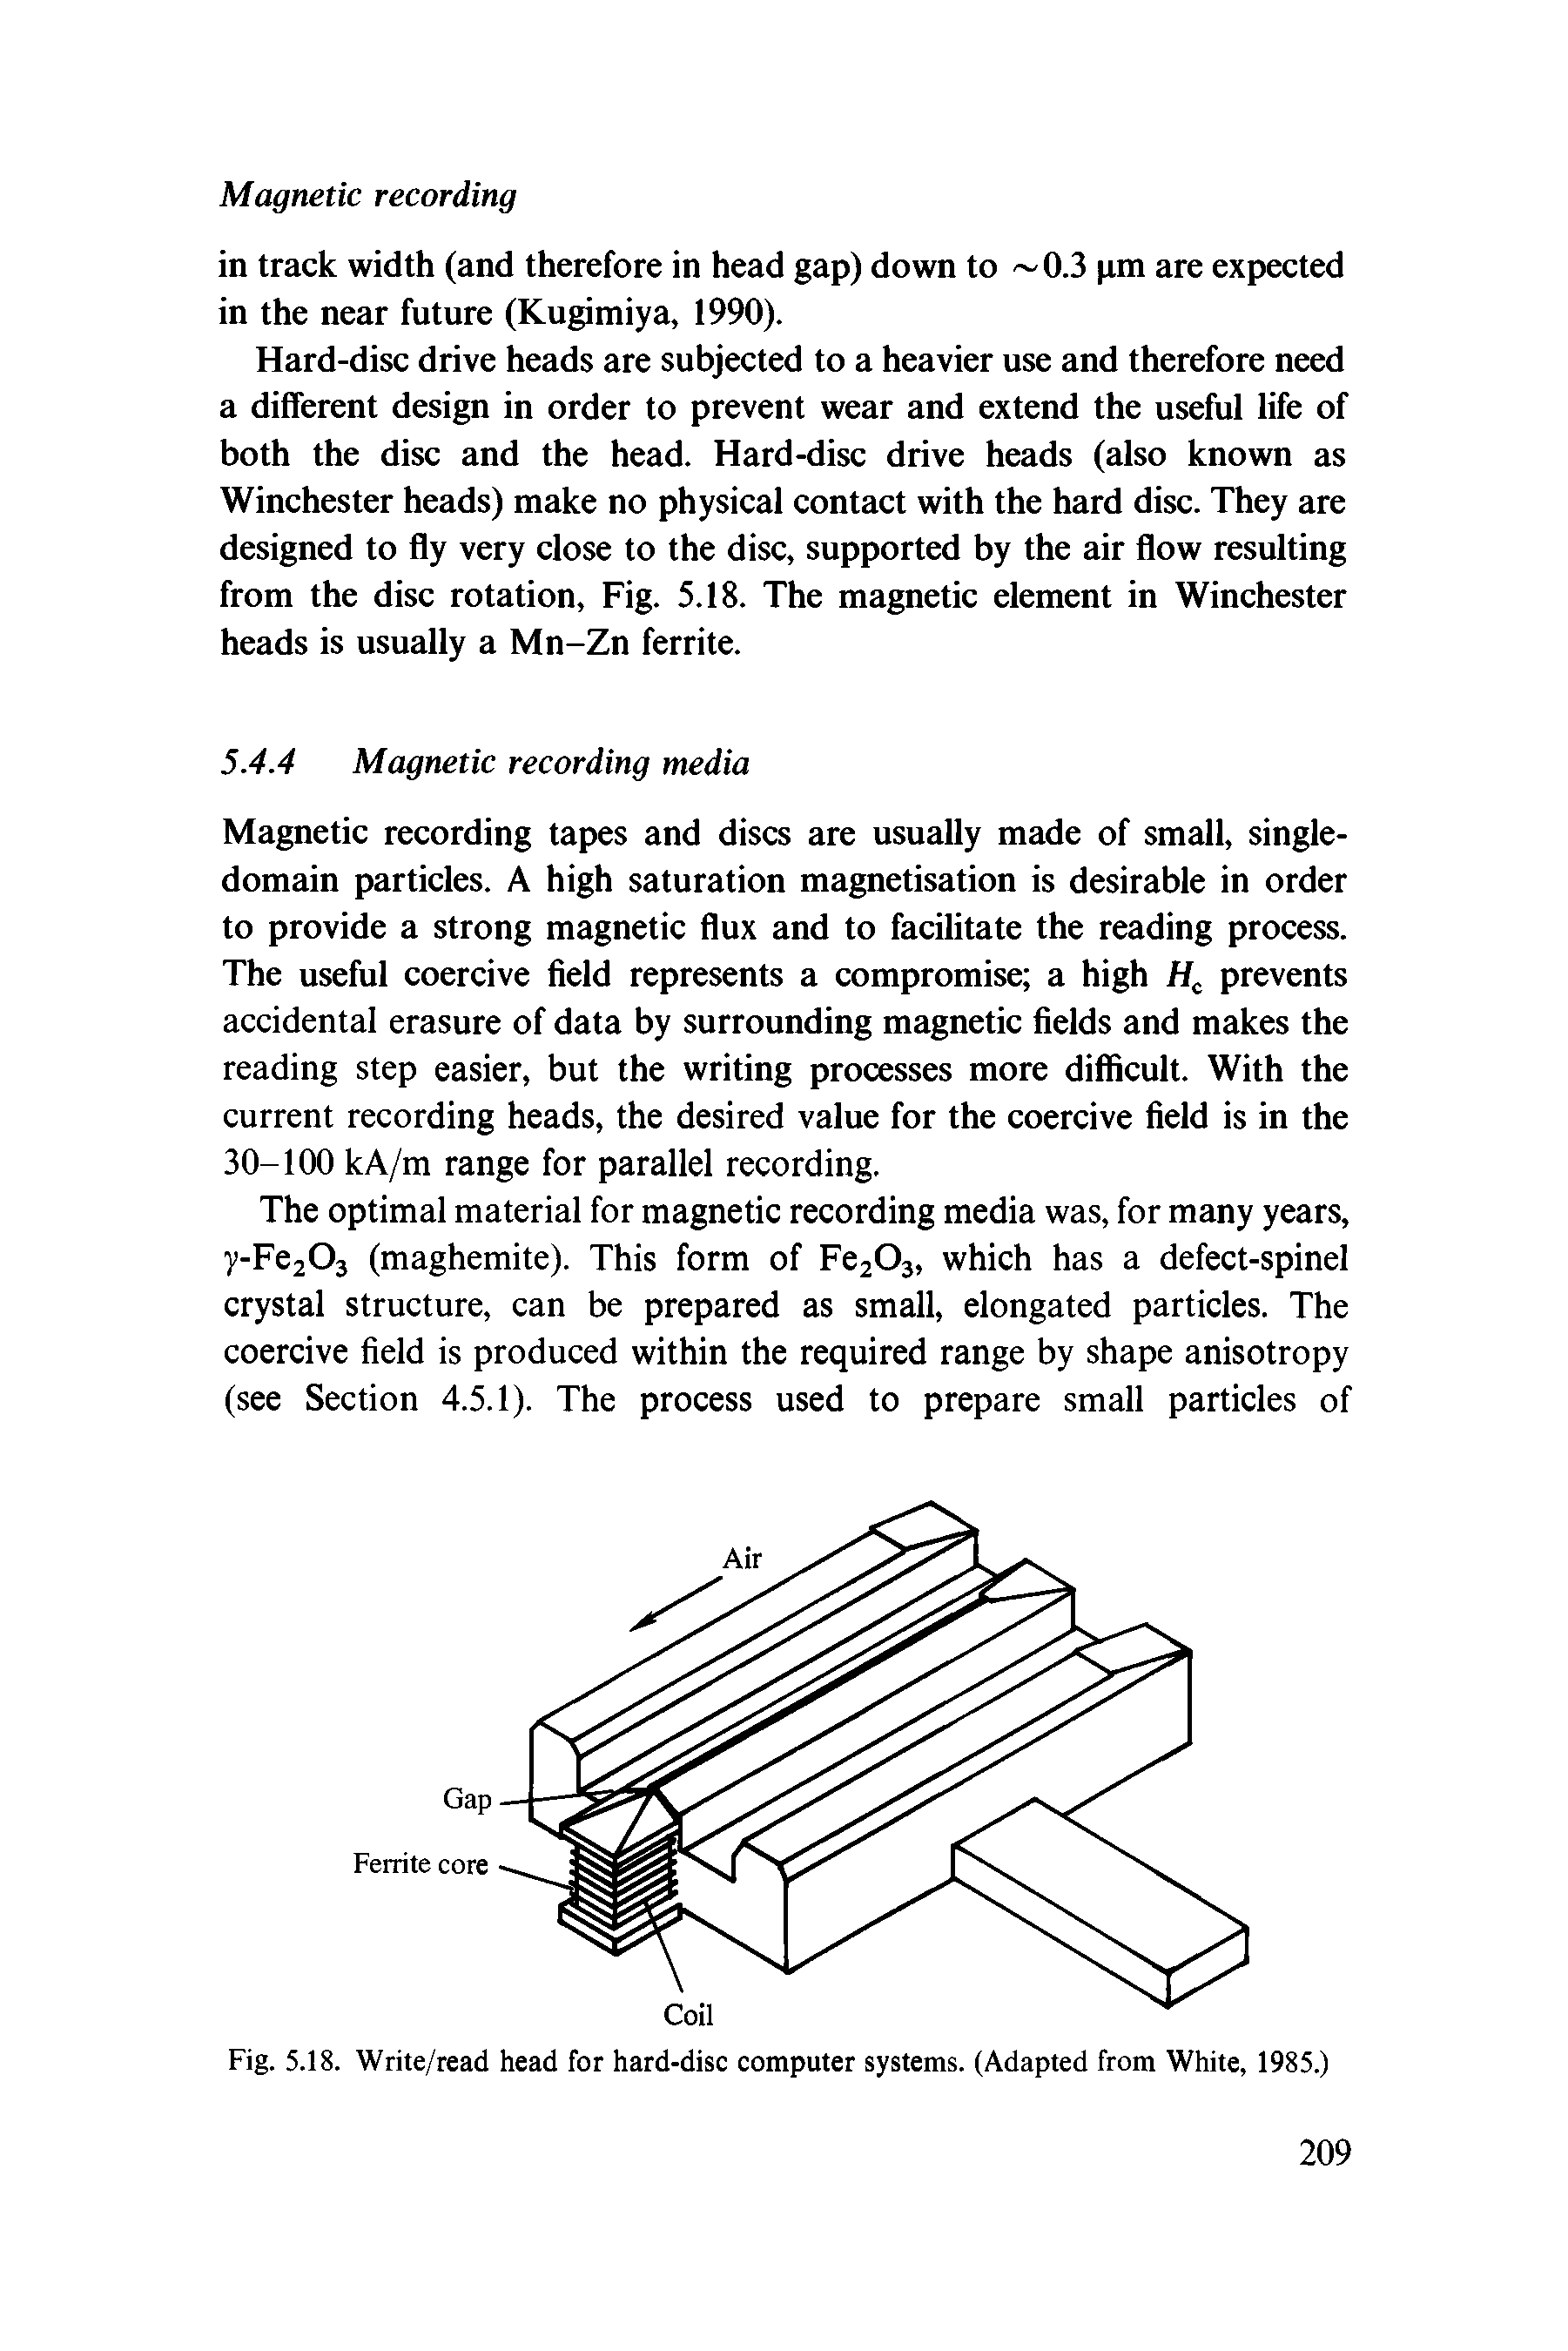 Fig. 5.18. Write/read head for hard-disc computer systems. (Adapted from White, 1985.)...